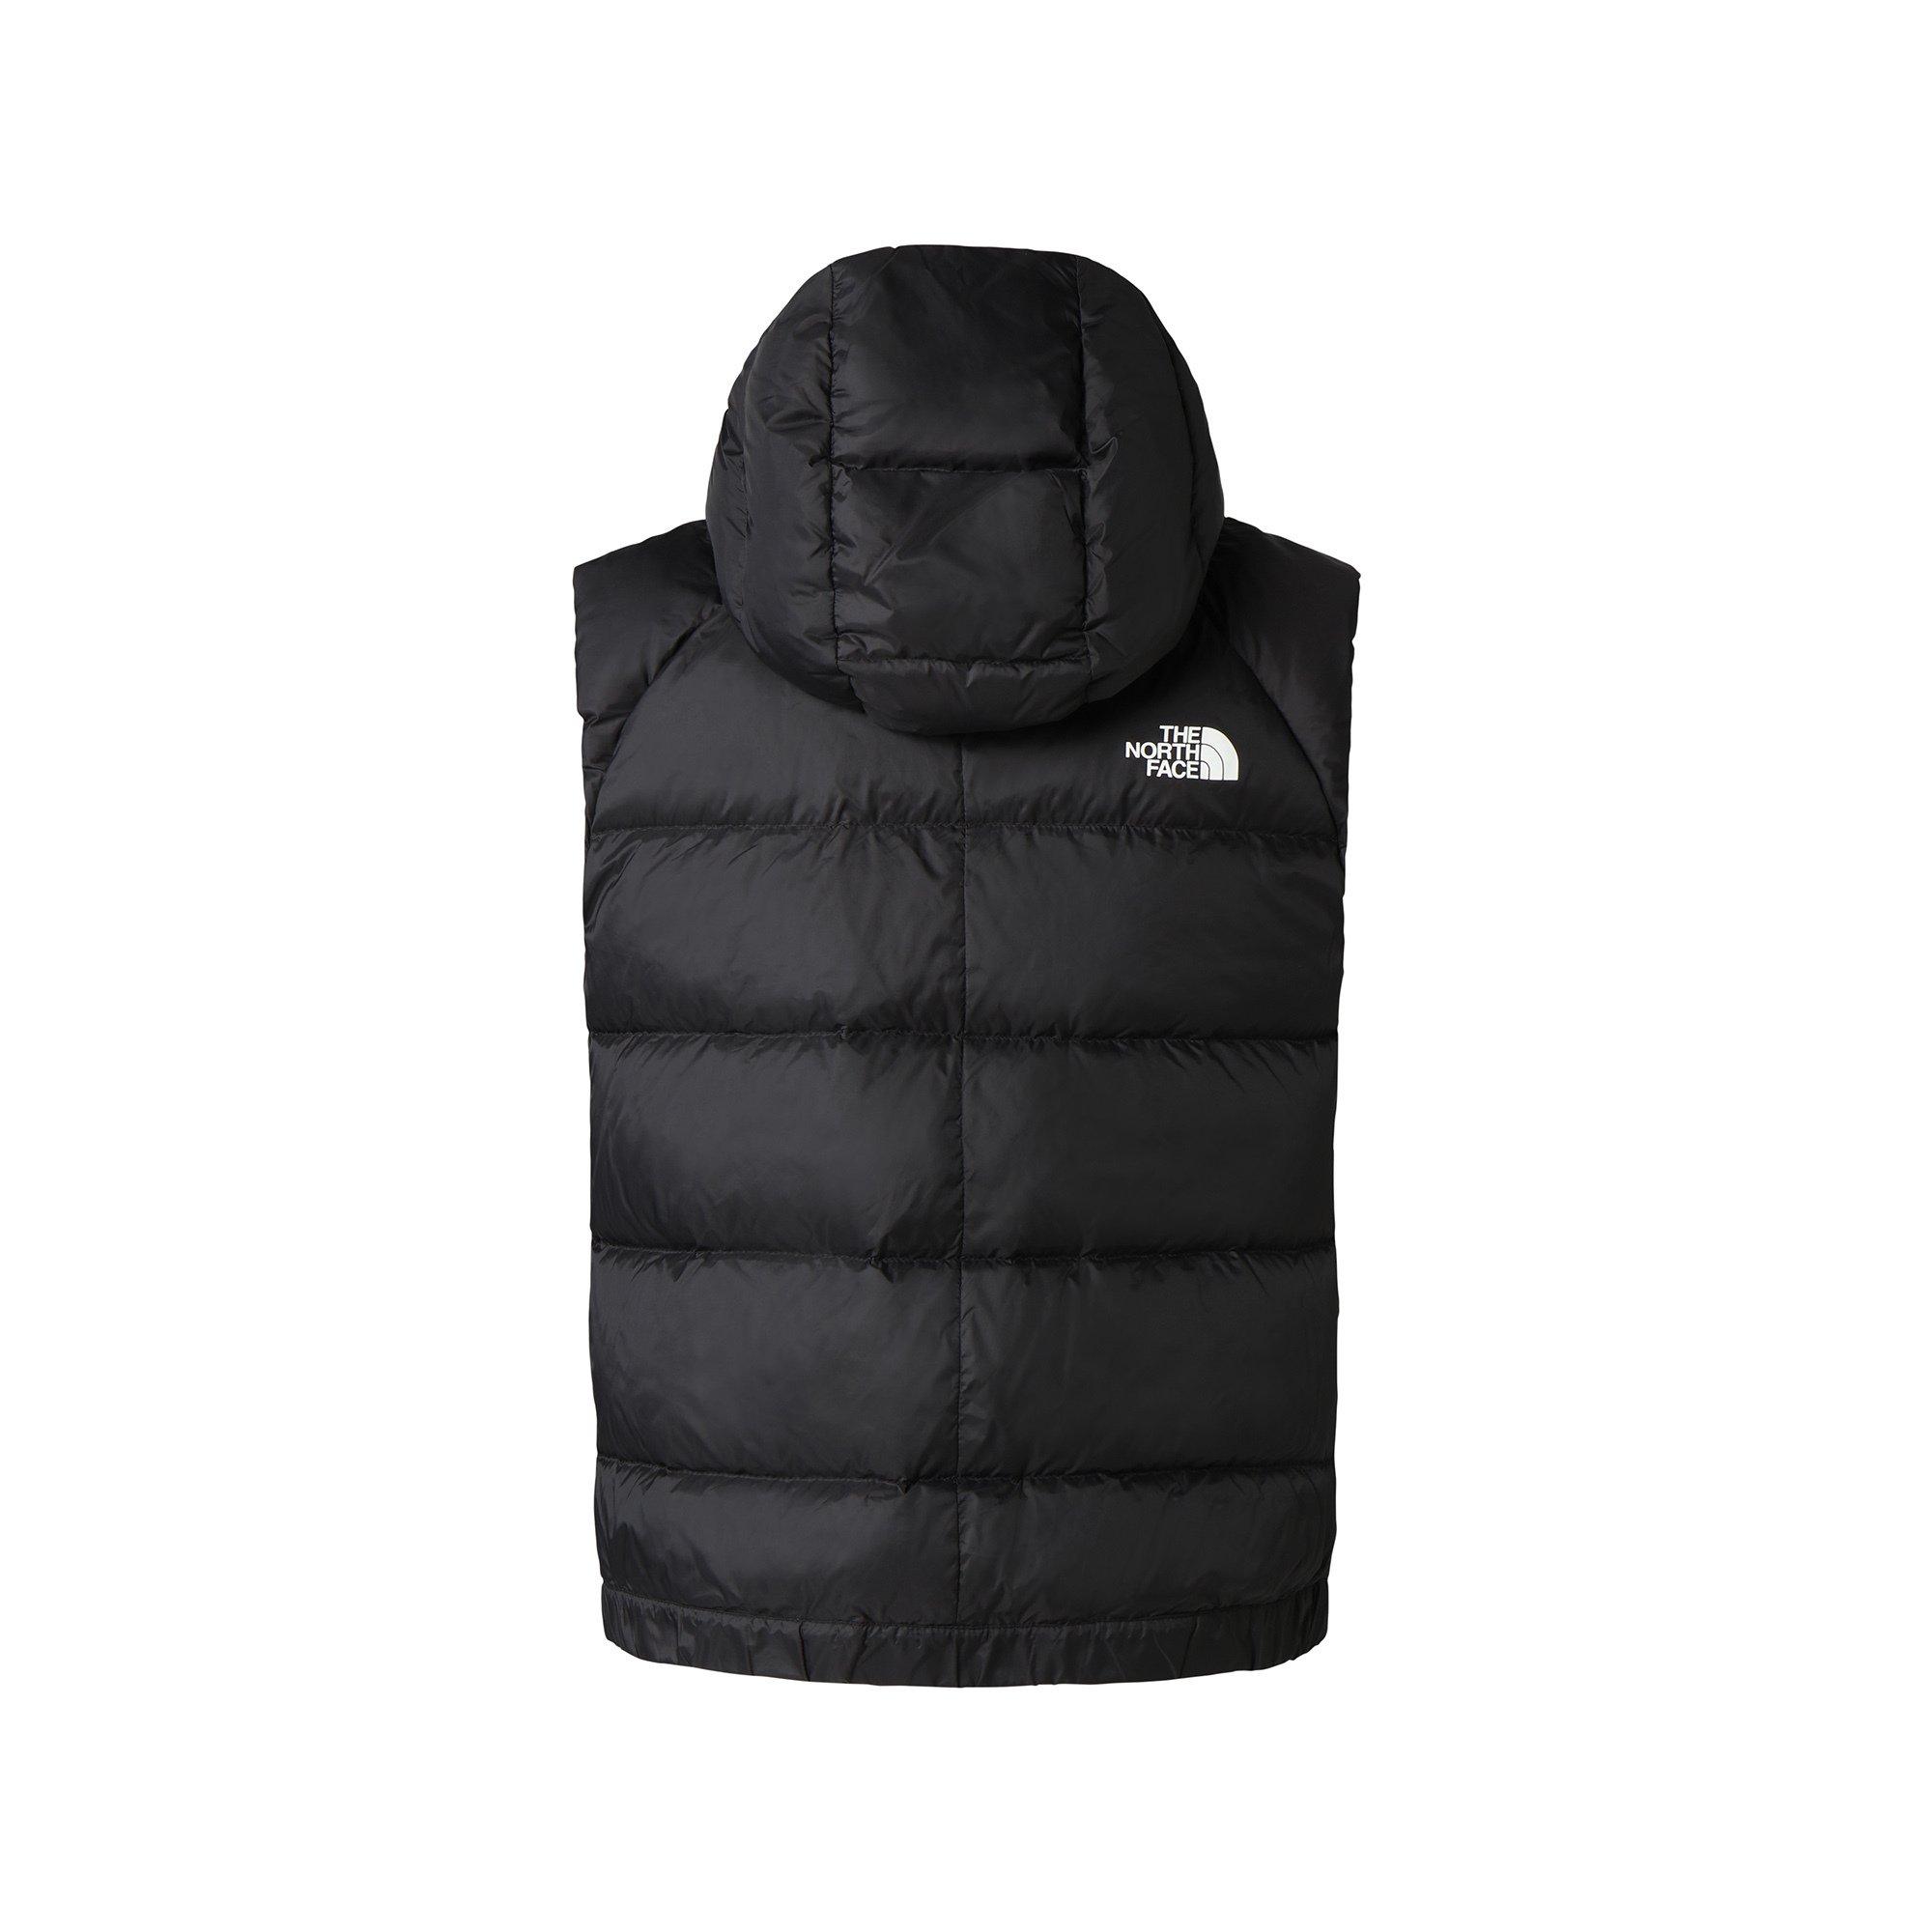 THE NORTH FACE W HYALITE VEST
 Gilet ouatiné 